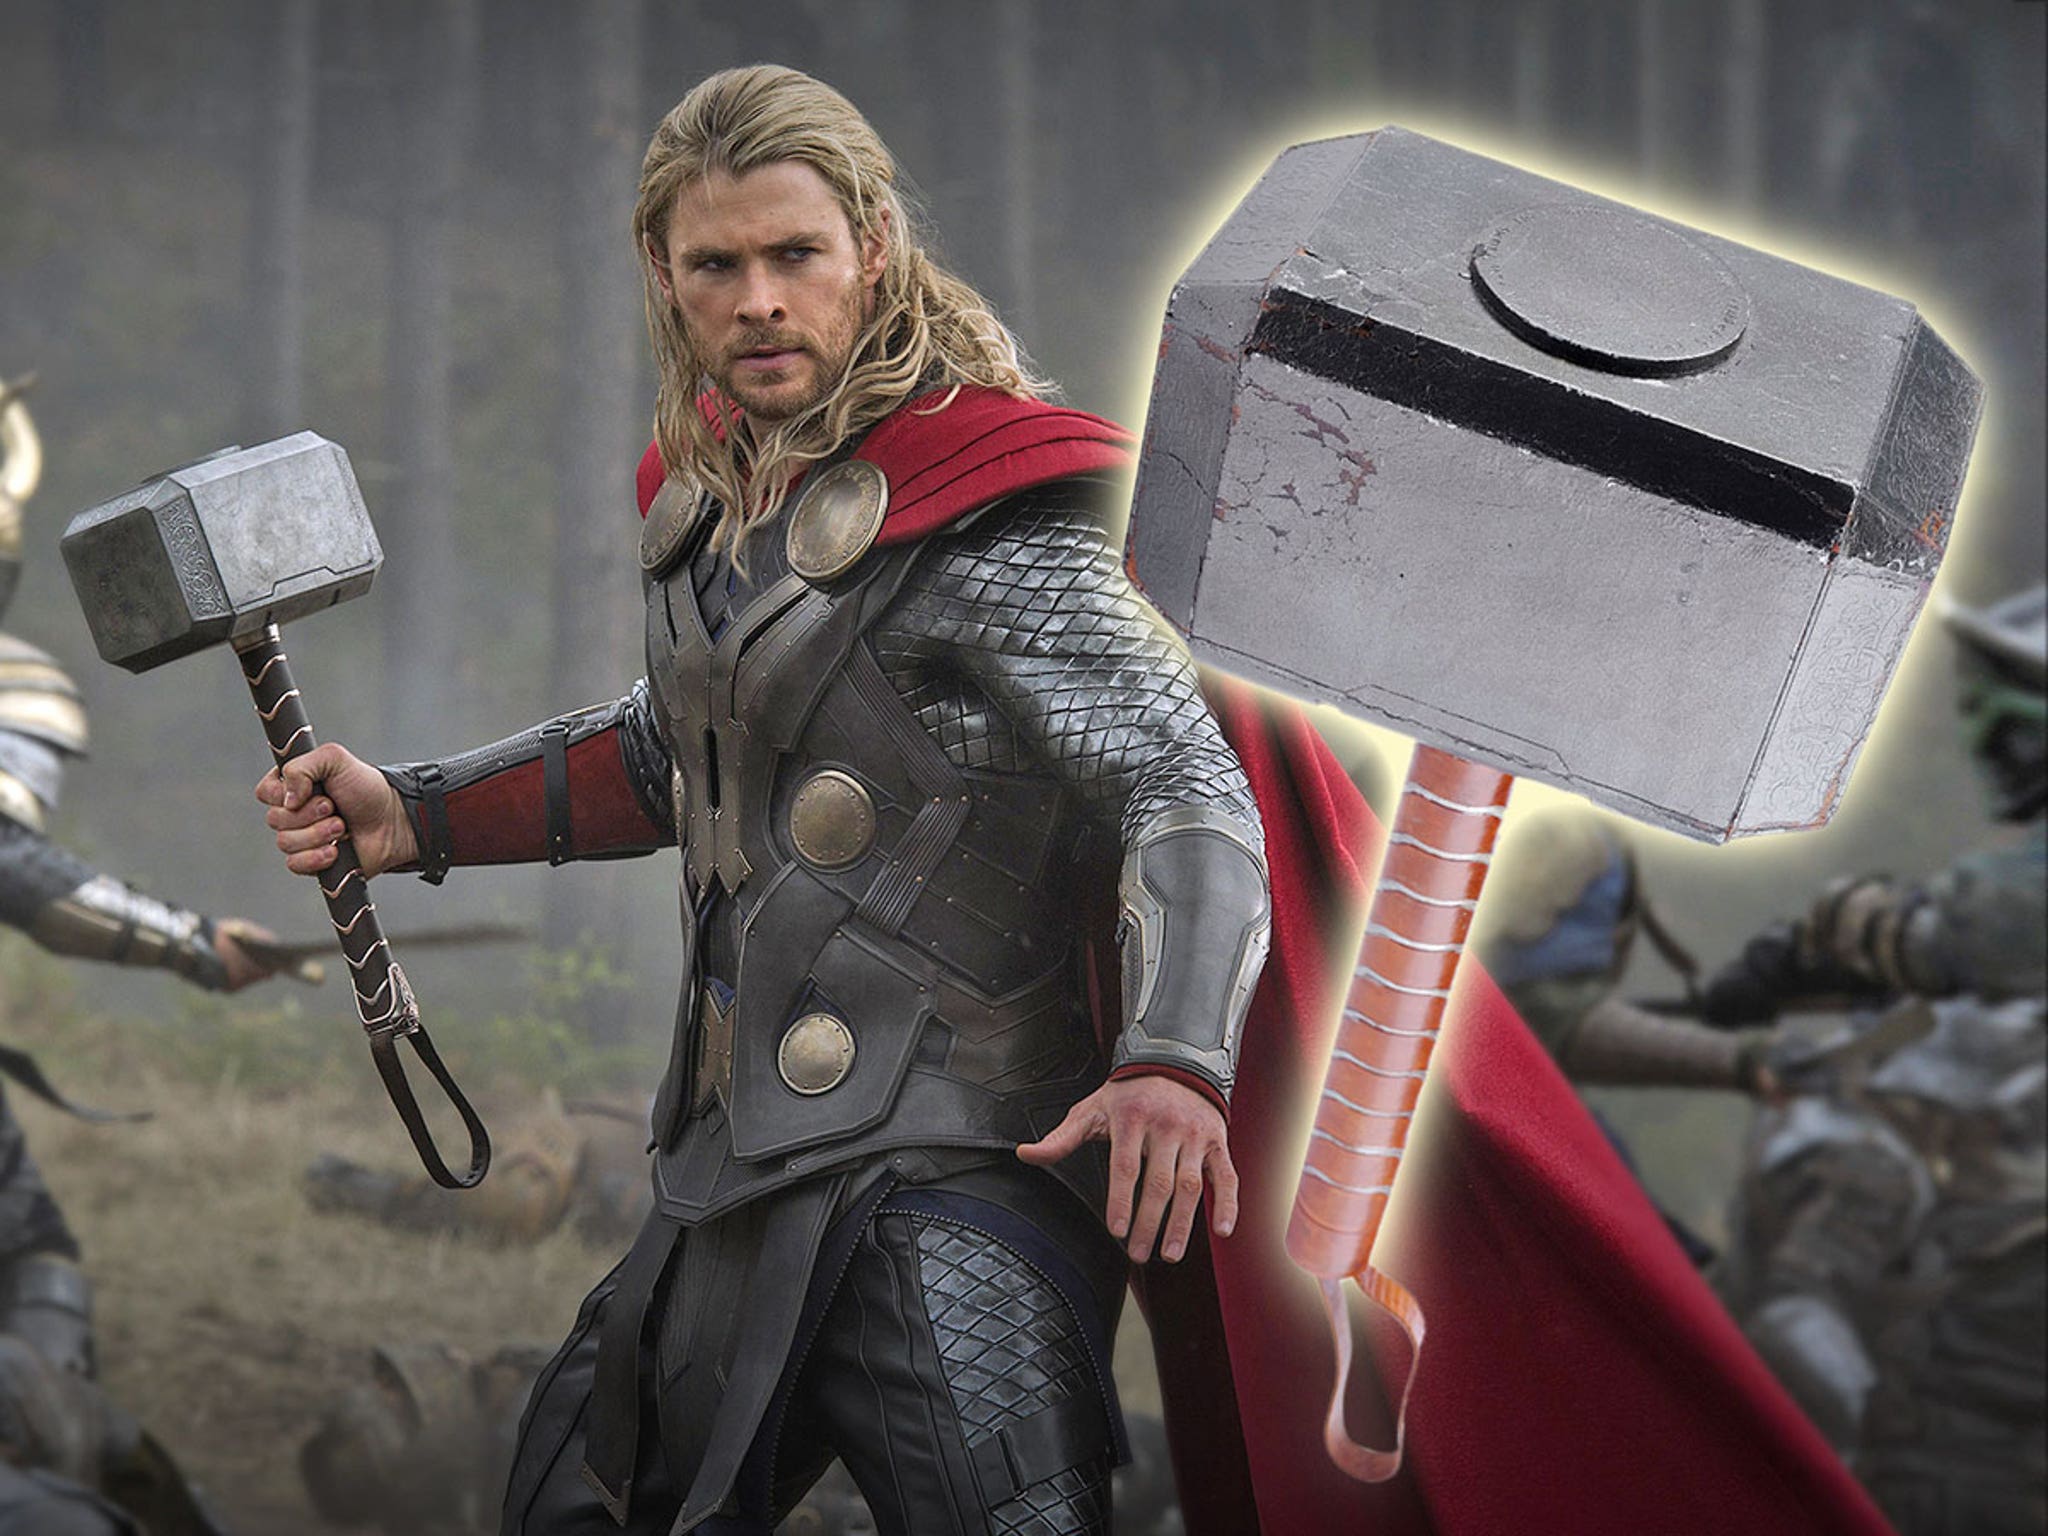 Chris Hemsworth's 'Thor' Hammer Going Up For Sale in Movie Memorabilia  Auction